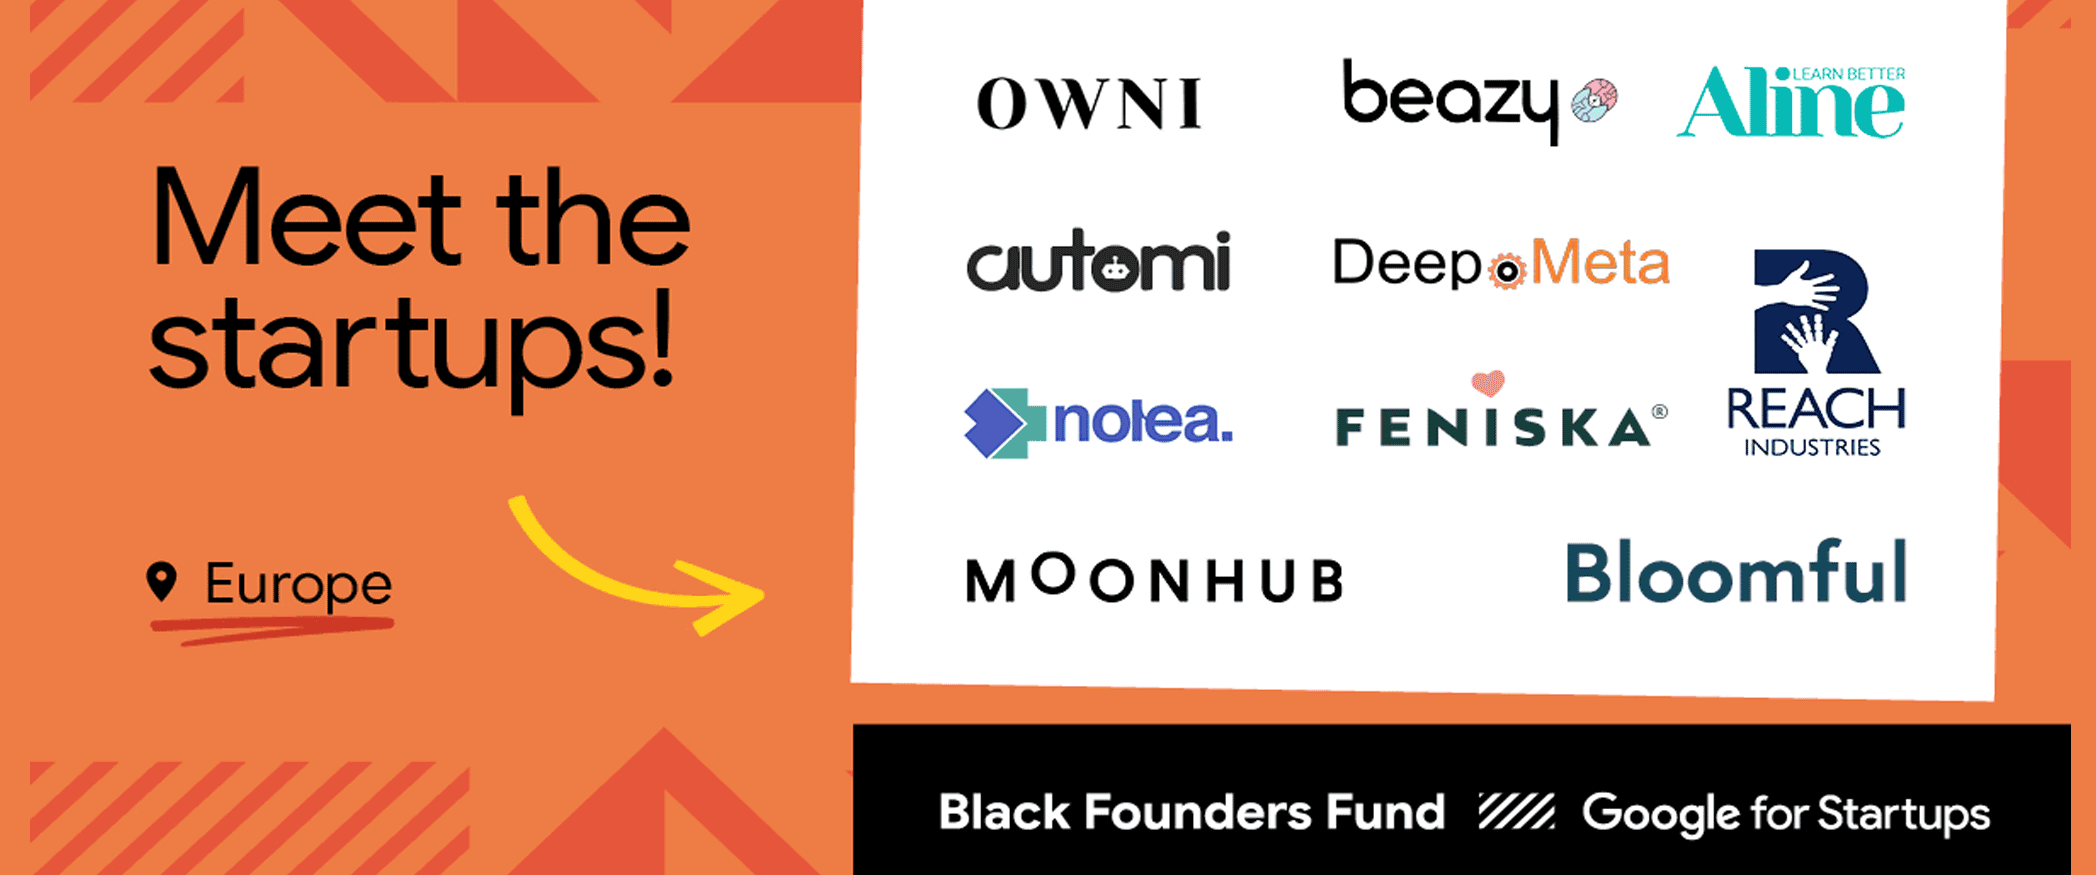 An image showing the logos of the startups selected for the second European Google for Startups Black Founders Fund